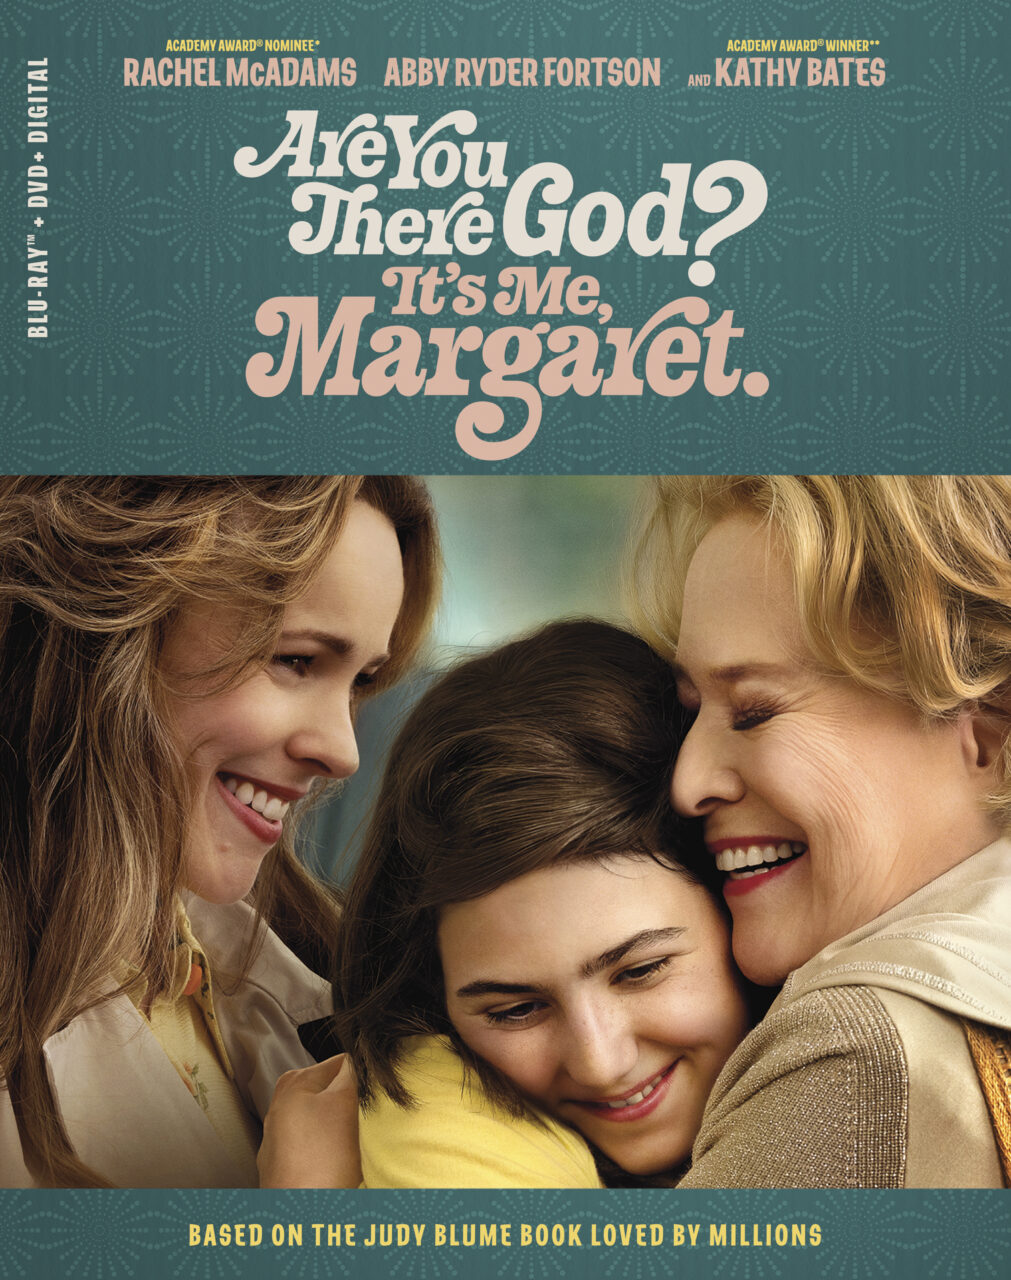 Are You There God? It's Me Margaret Blu-Ray Combo Pack cover (Lionsgate)